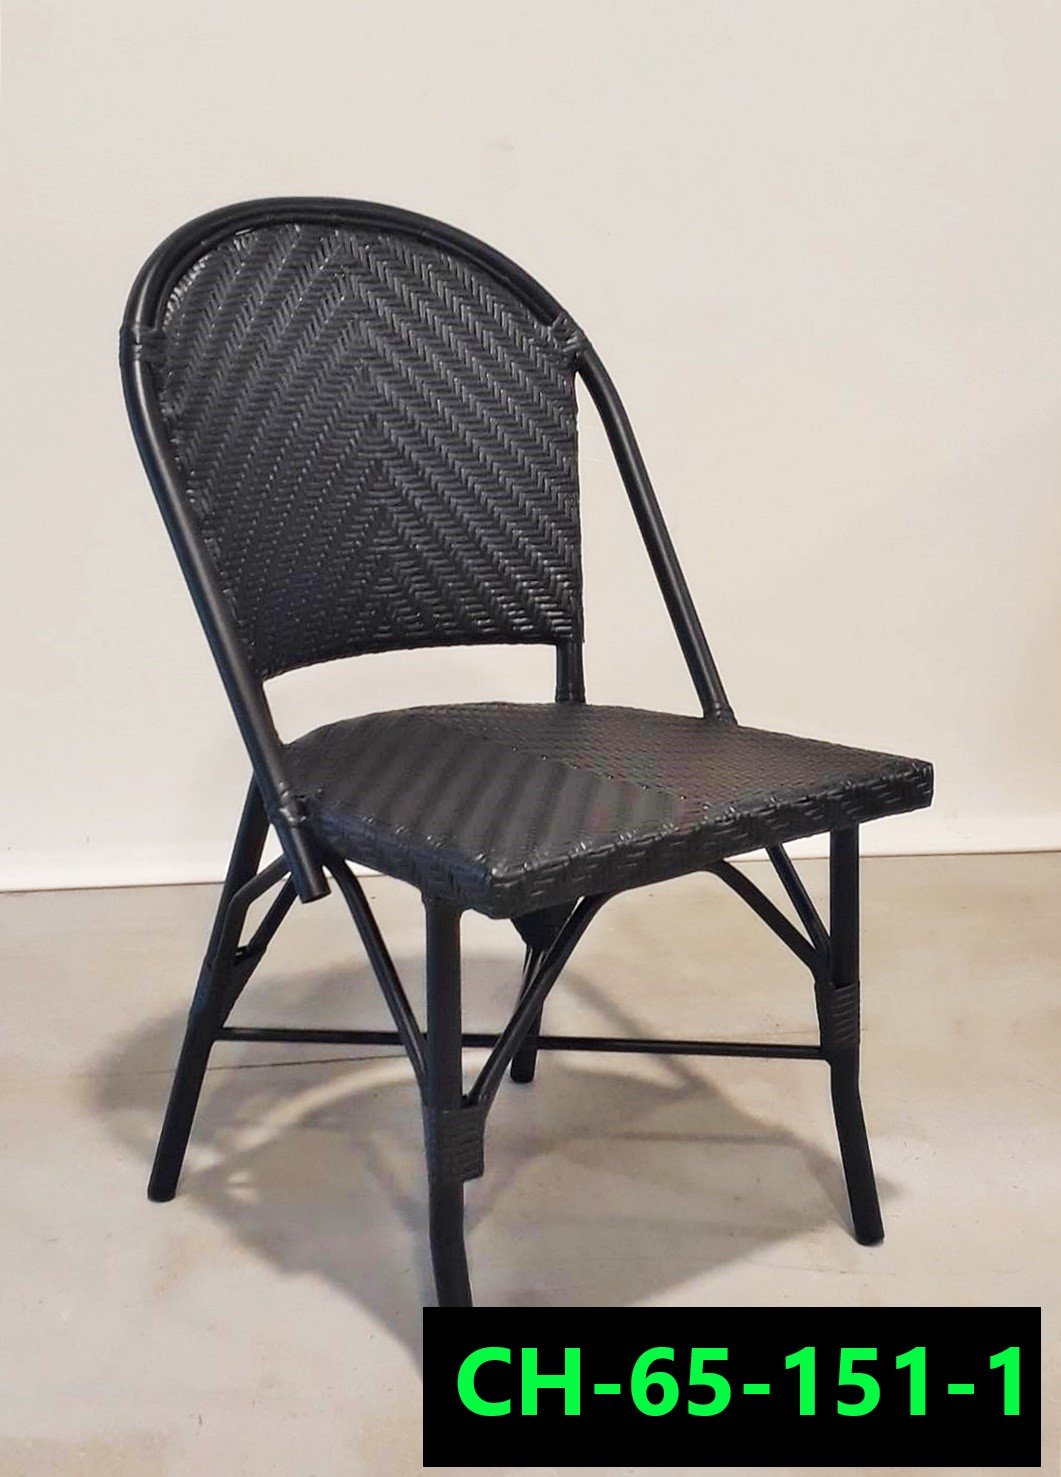 Rattan Chair set Product code CH-65-151-1